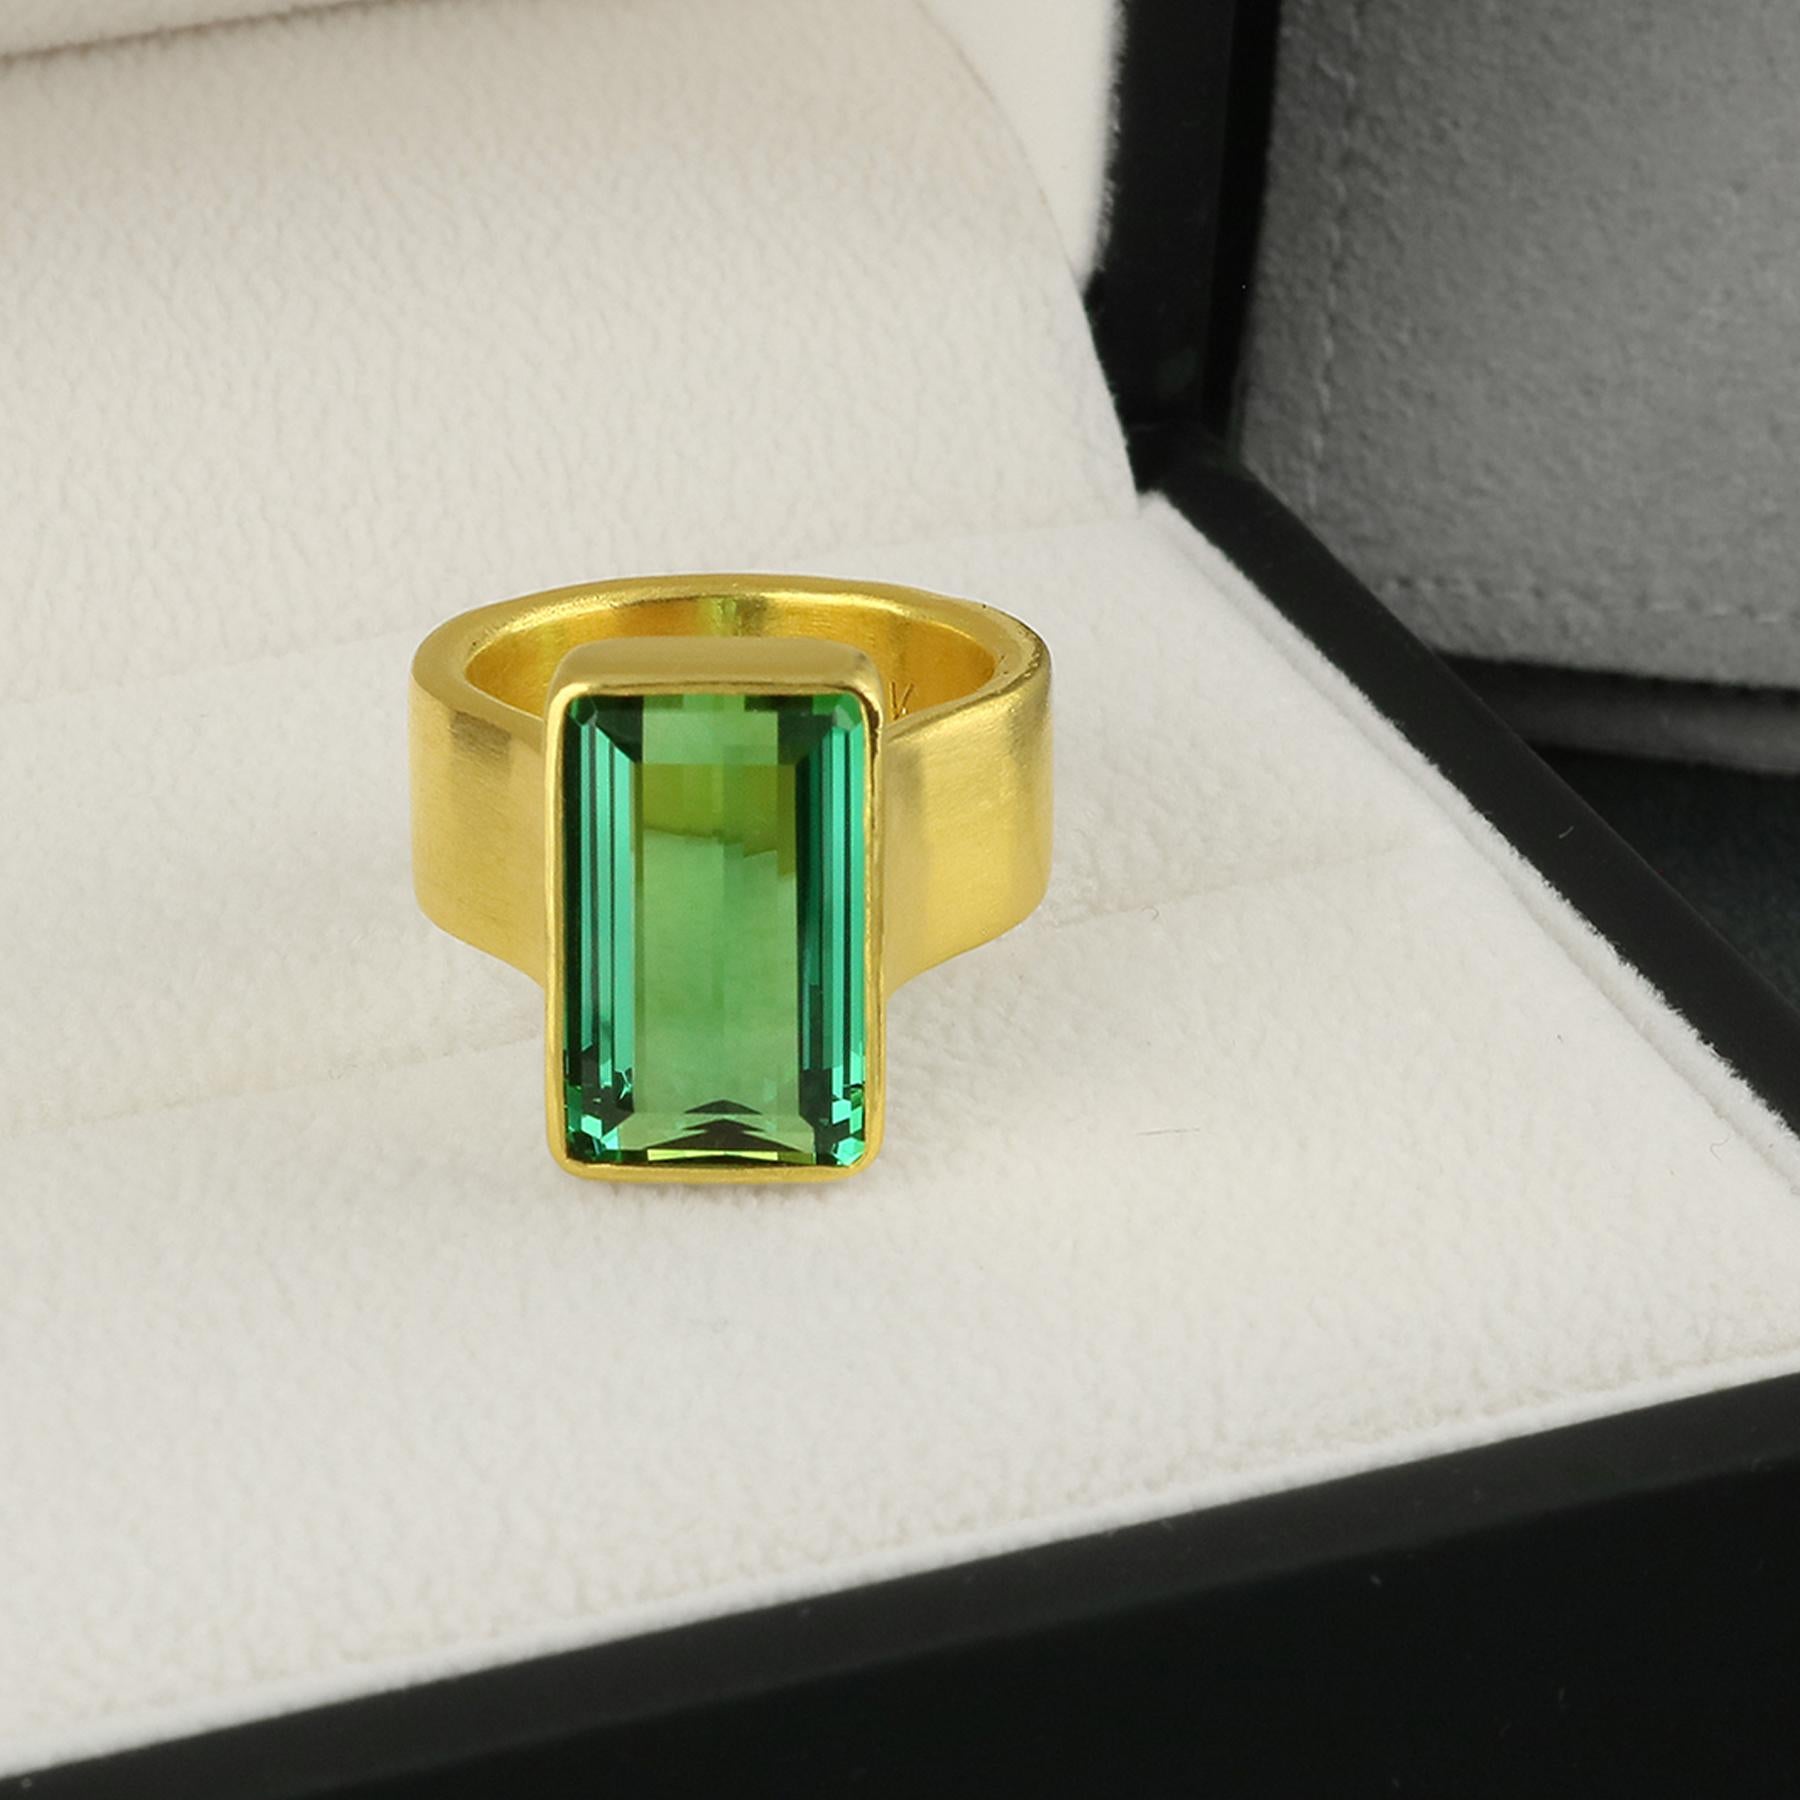 PHILIPPE SPENCER - Solid 22K Gold Completely Hand -Forged One-Of-A-Kind Wide-Band Statement Ring with 8.4 Ct. Extra-Fine Emerald Cut Green Tourmaline set in backless 22K Gold Setting. Heavy Matte Brushed Finish. Size 6 1/2 to 6 3/4, and is in-stock